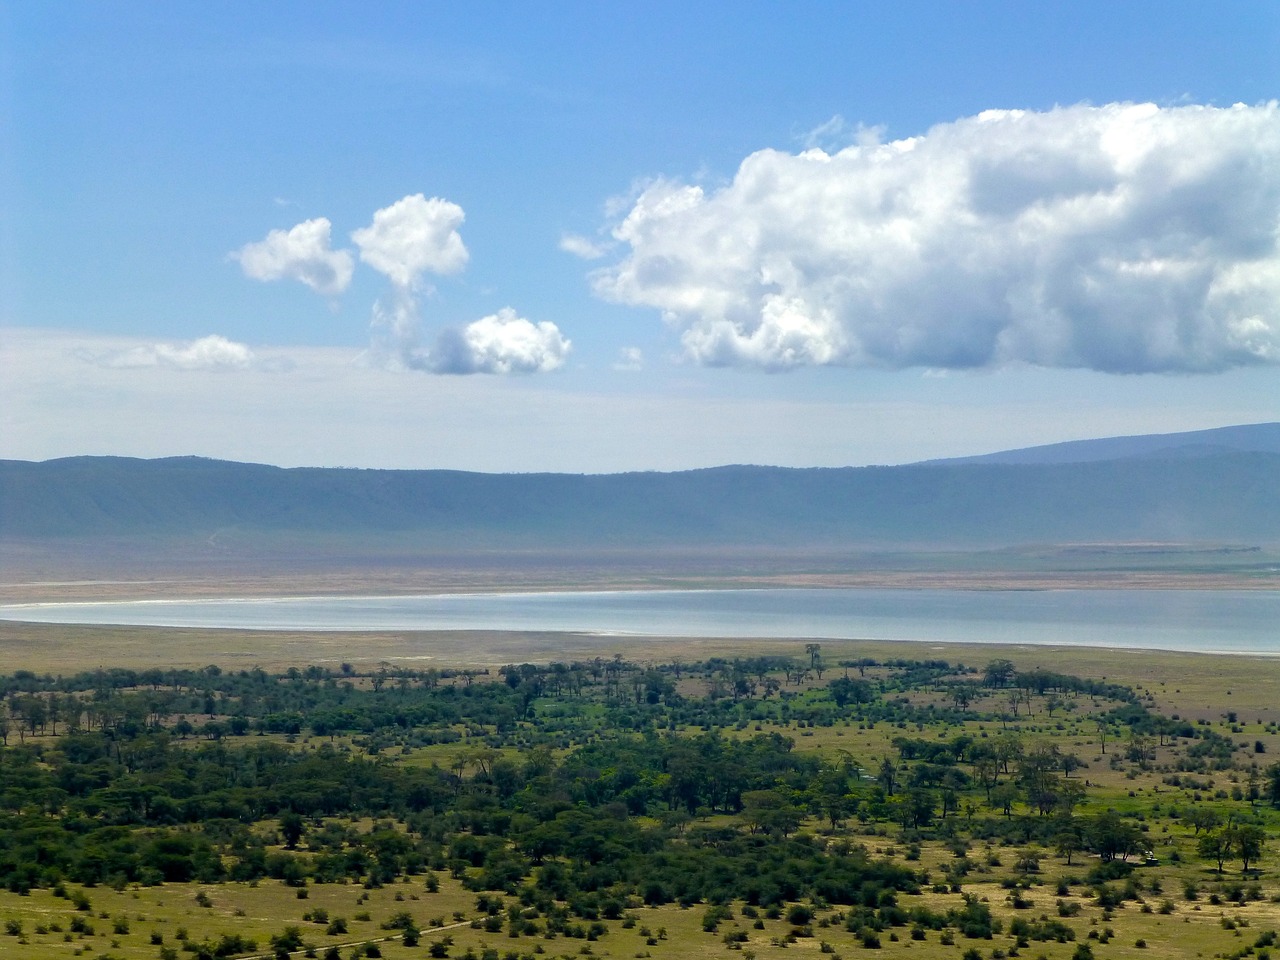 Best time to visit Ngorongoro Crater